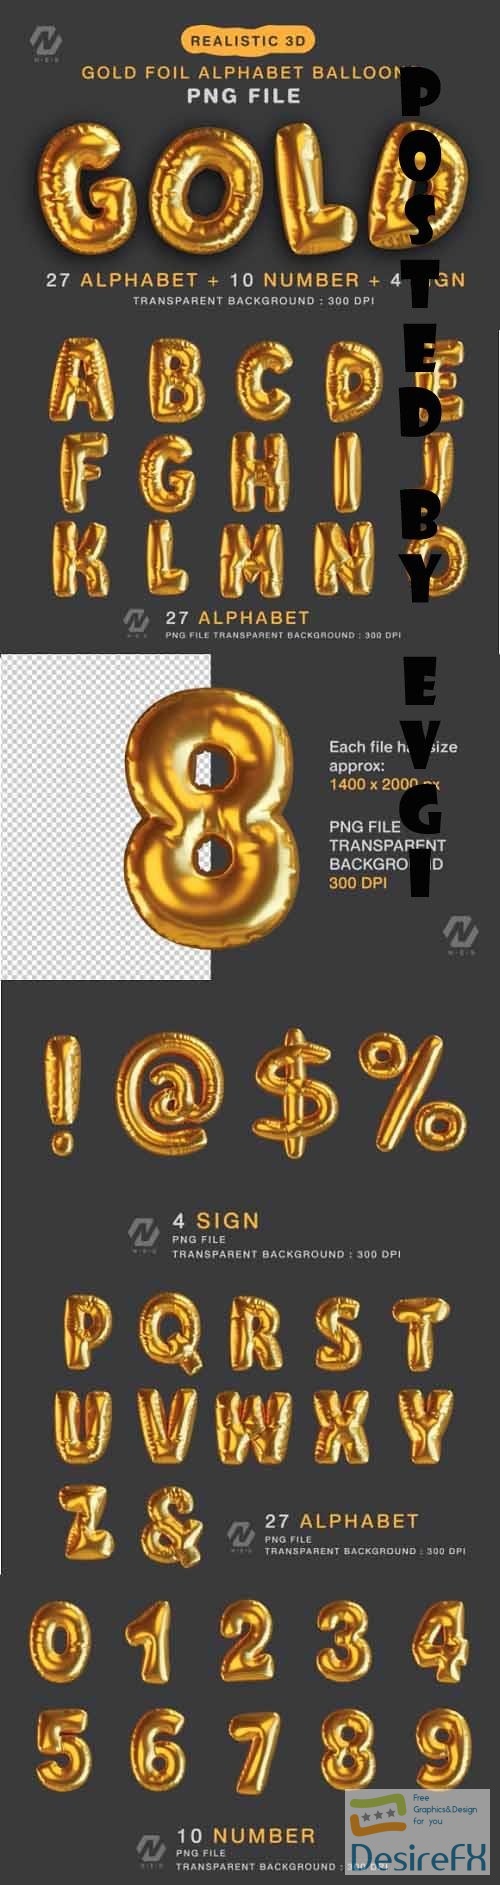 Gold Foil Alphabet Balloon Realistic PNG